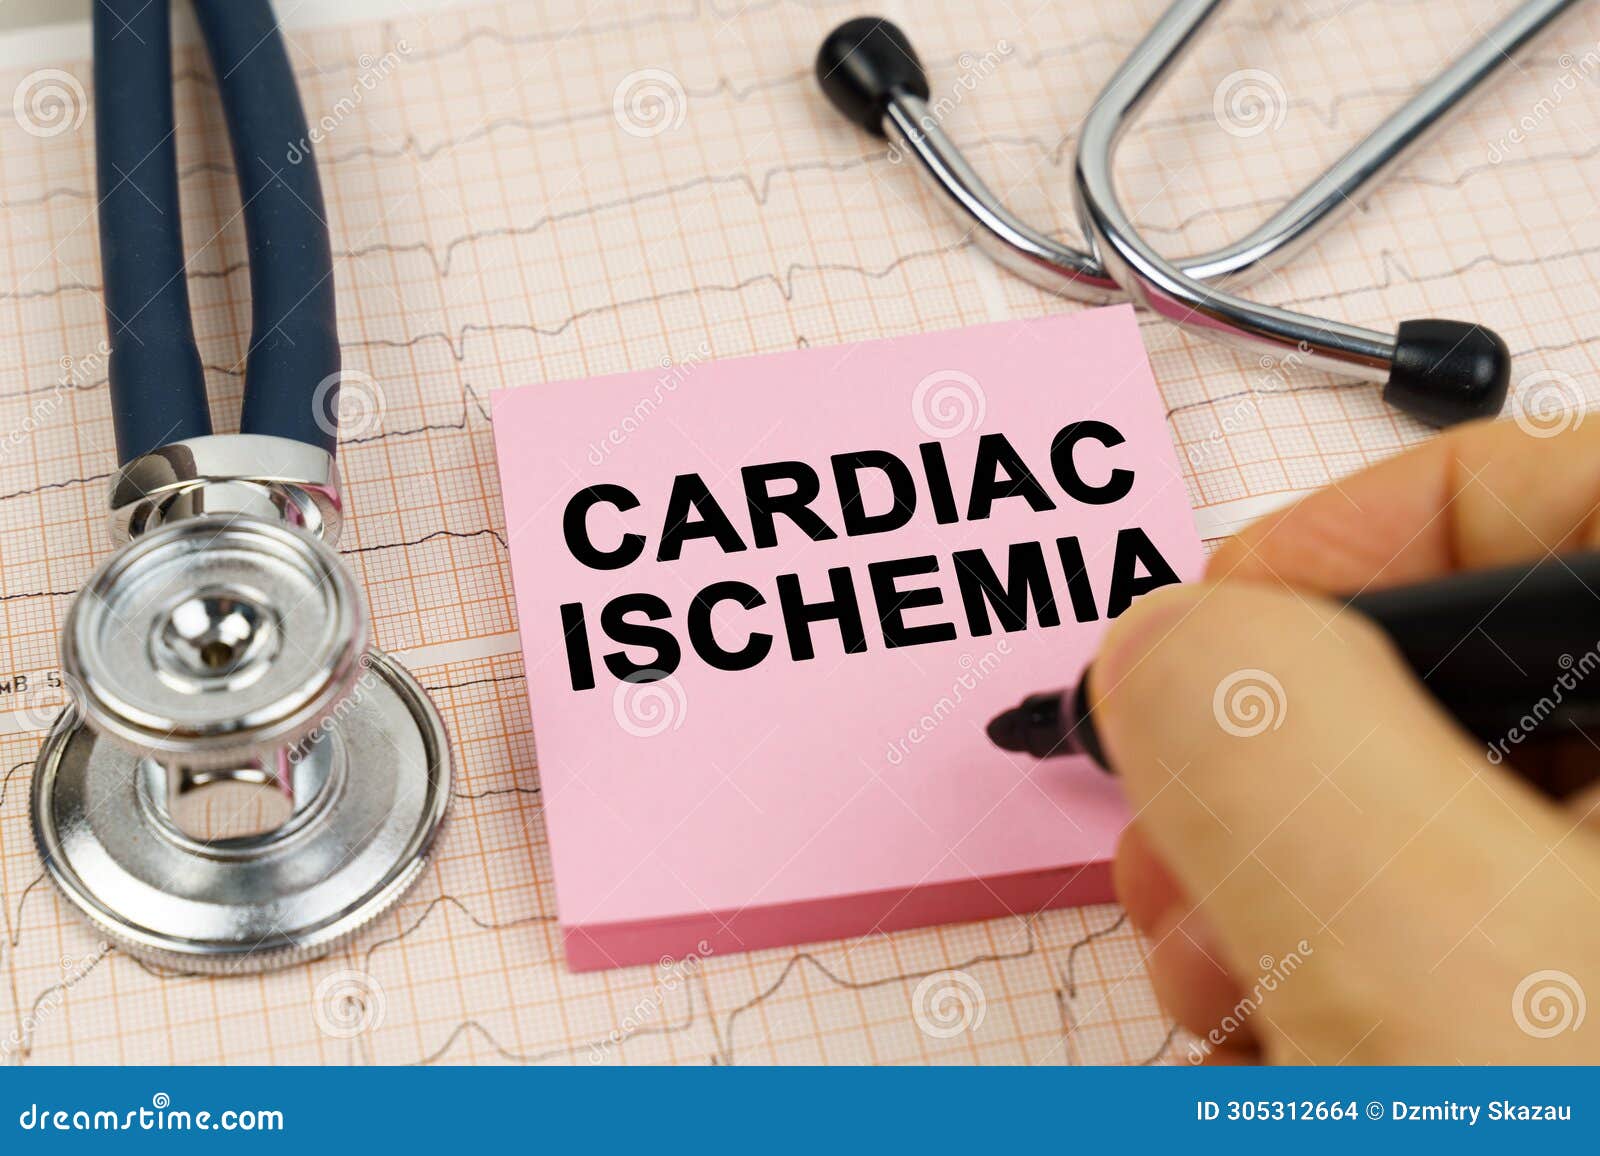 on the cardiograms there is a stethoscope and a sticker with the inscription - cardiac ischemia